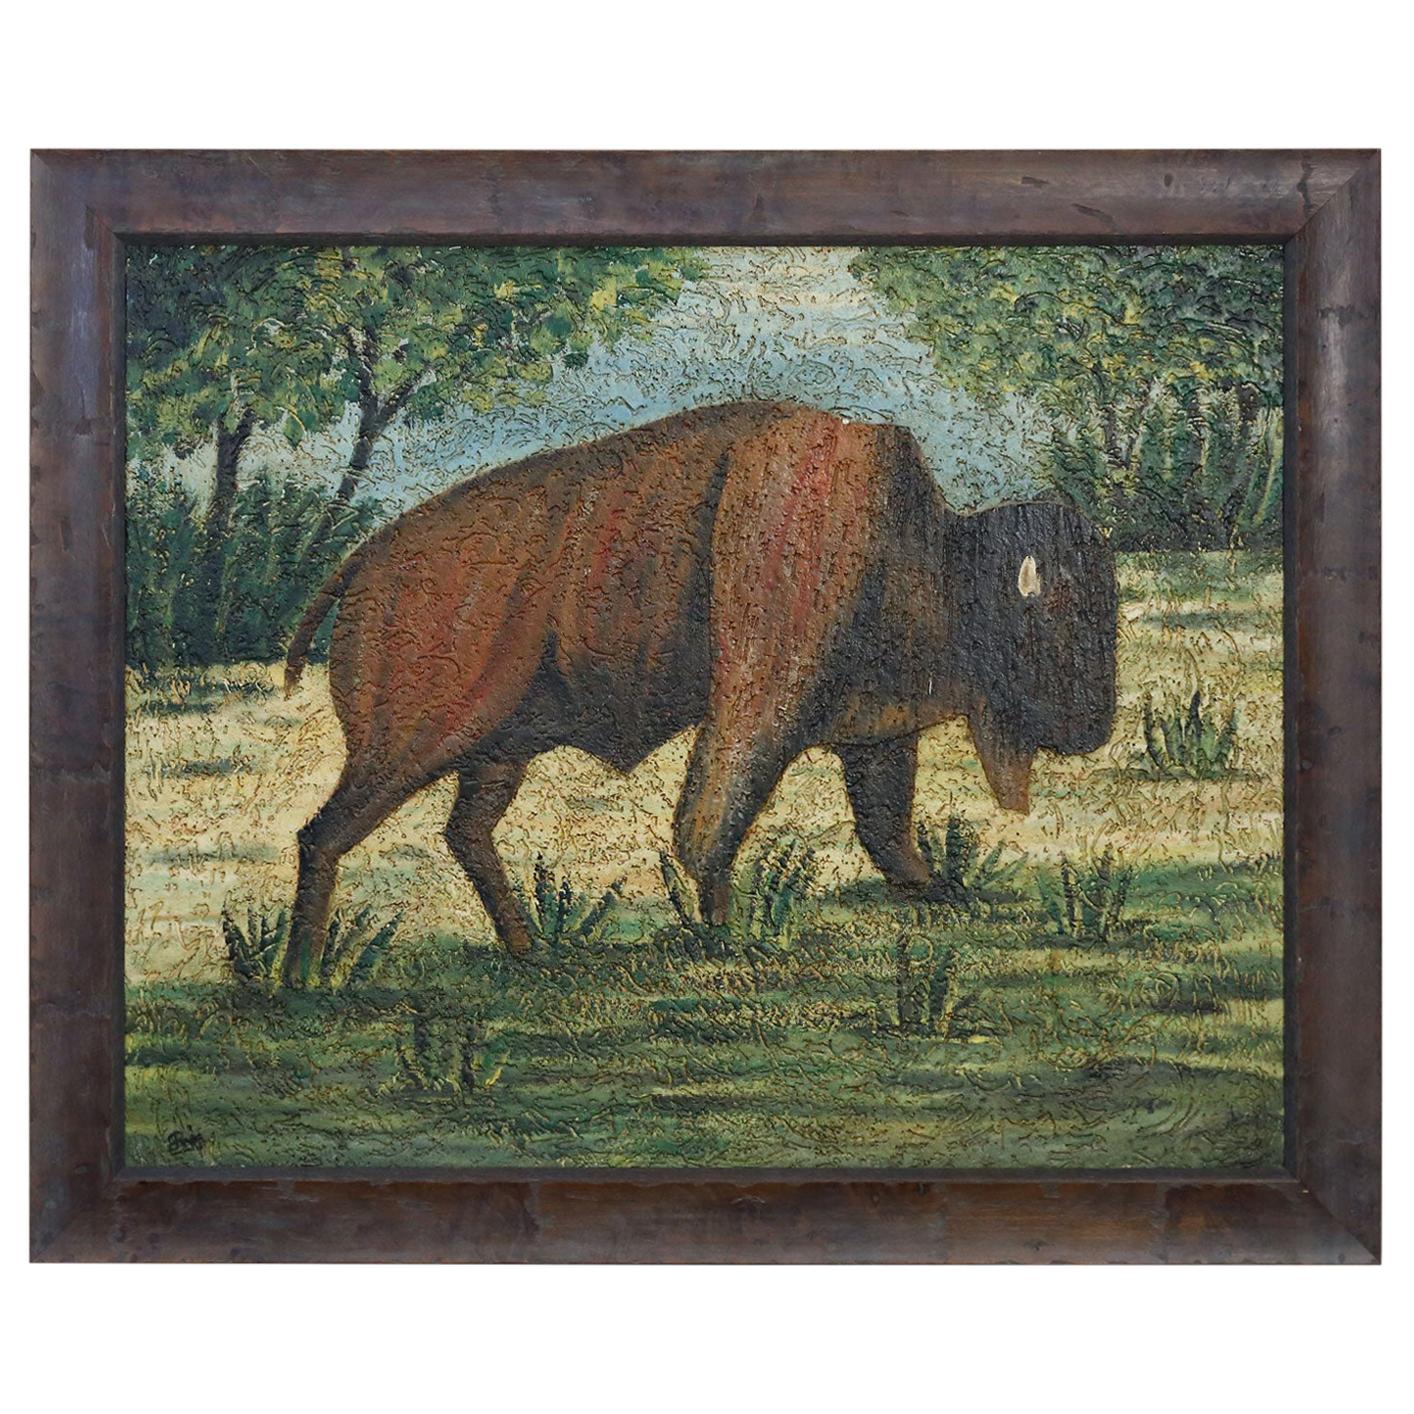 Interesting and Large Painting of a Buffalo from Belgium